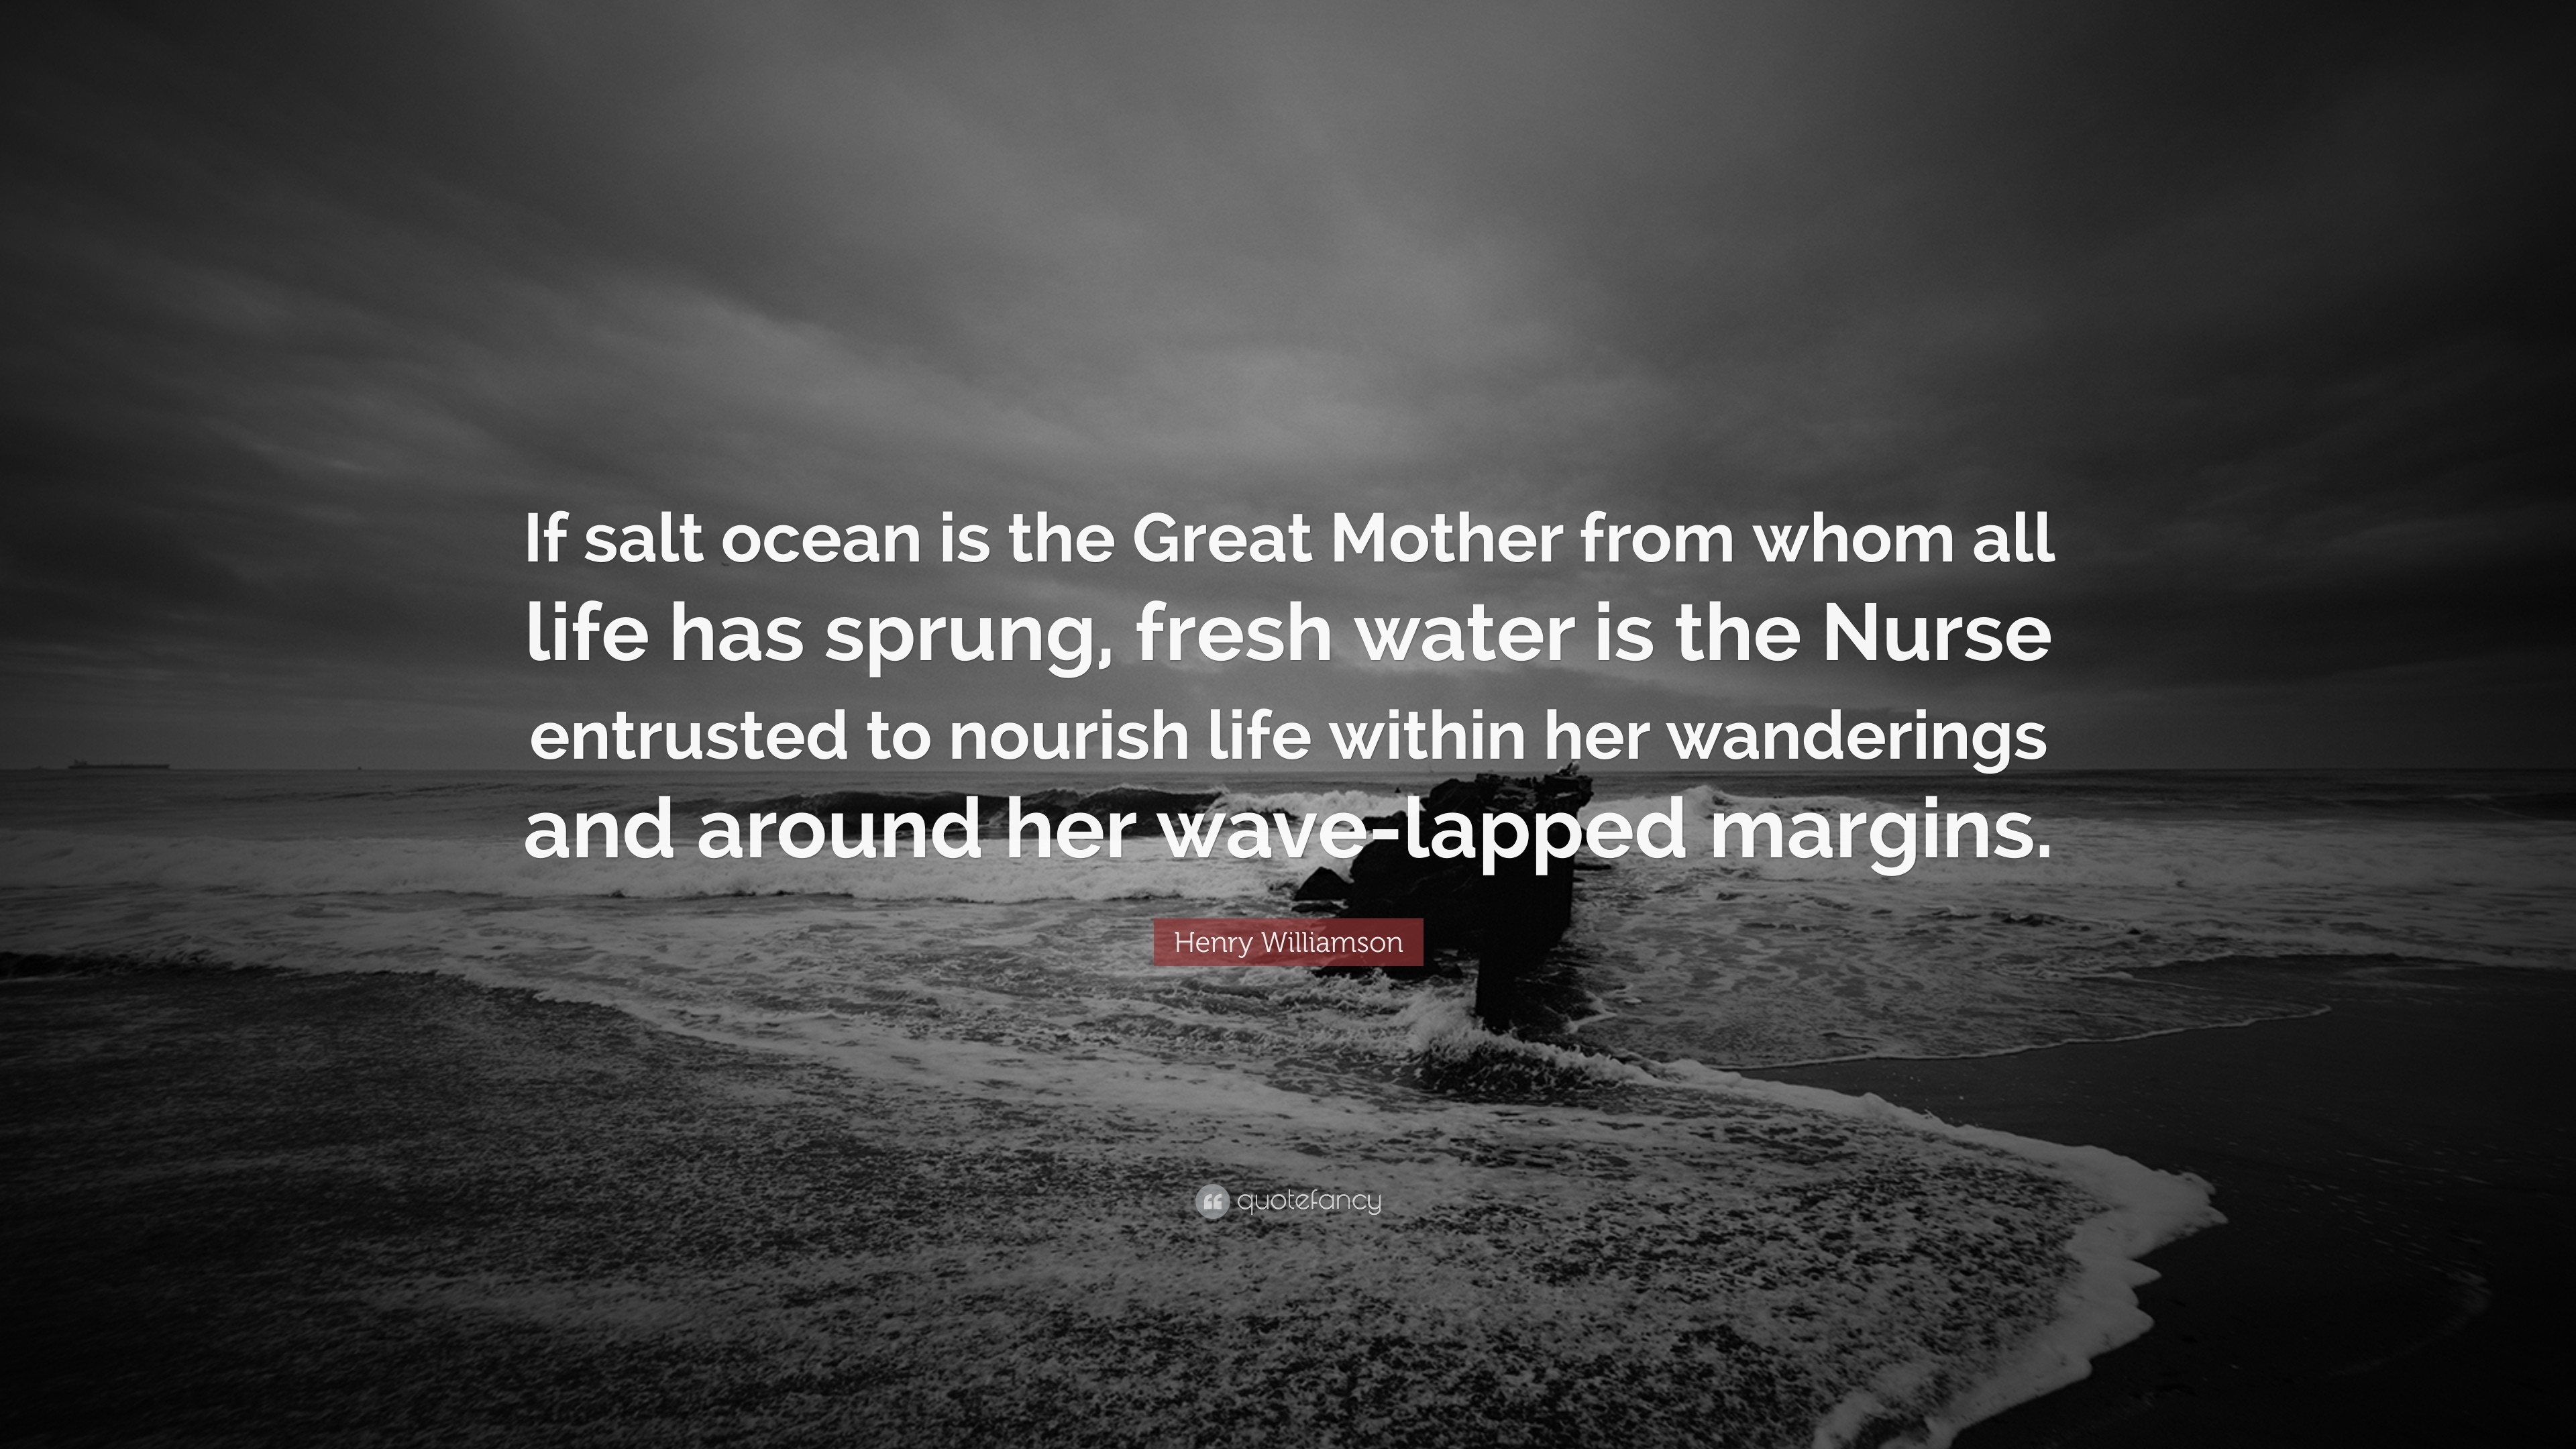 3840x2160 Henry Williamson Quote: “If salt ocean is the Great Mother from whom all  life